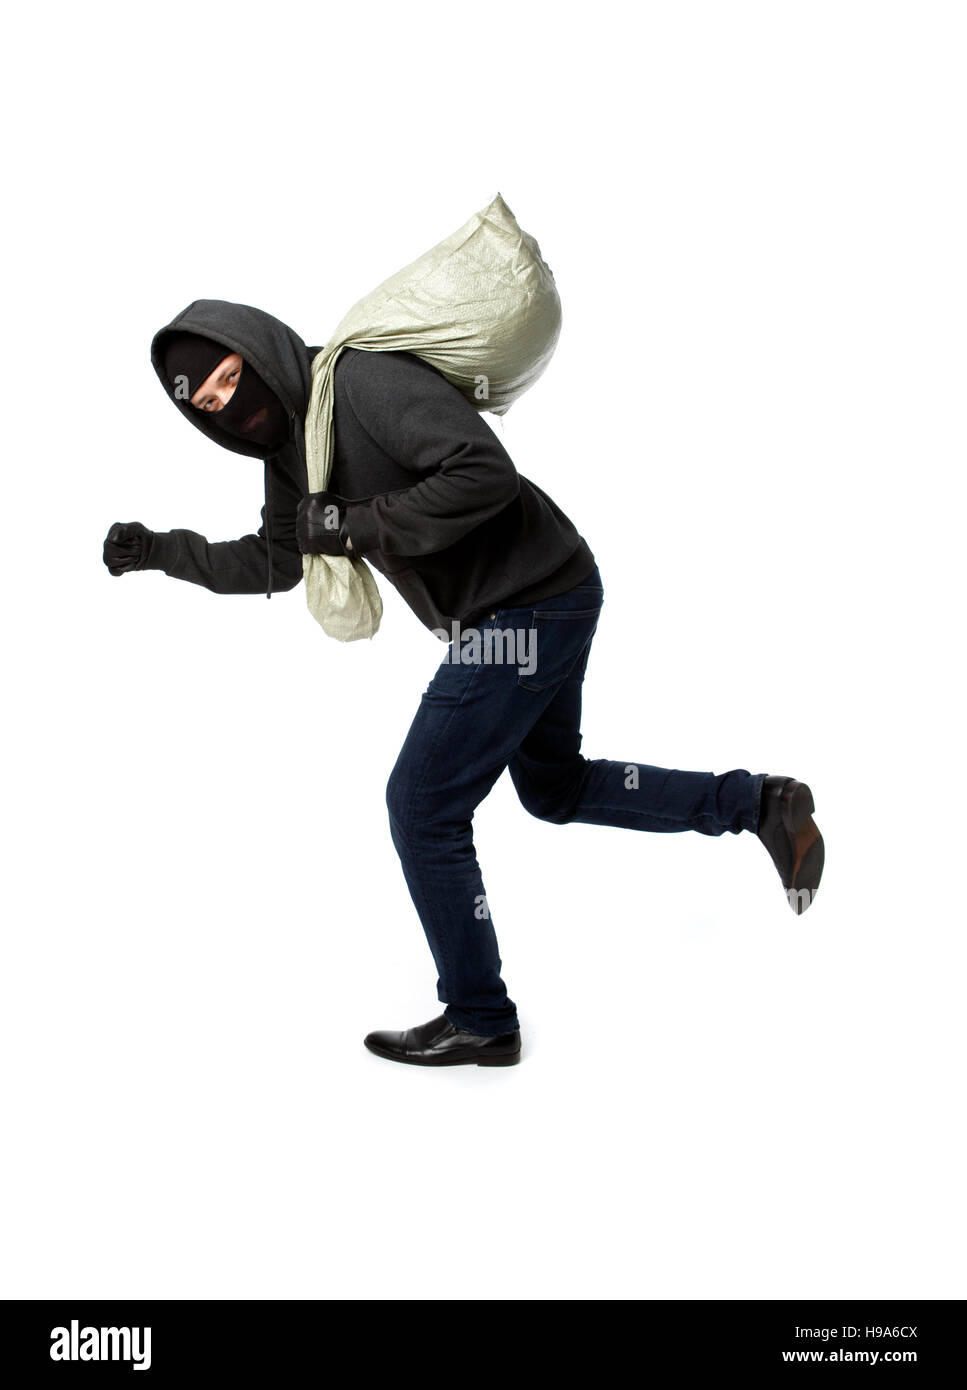 Thief escapes with full bag Stock Photo